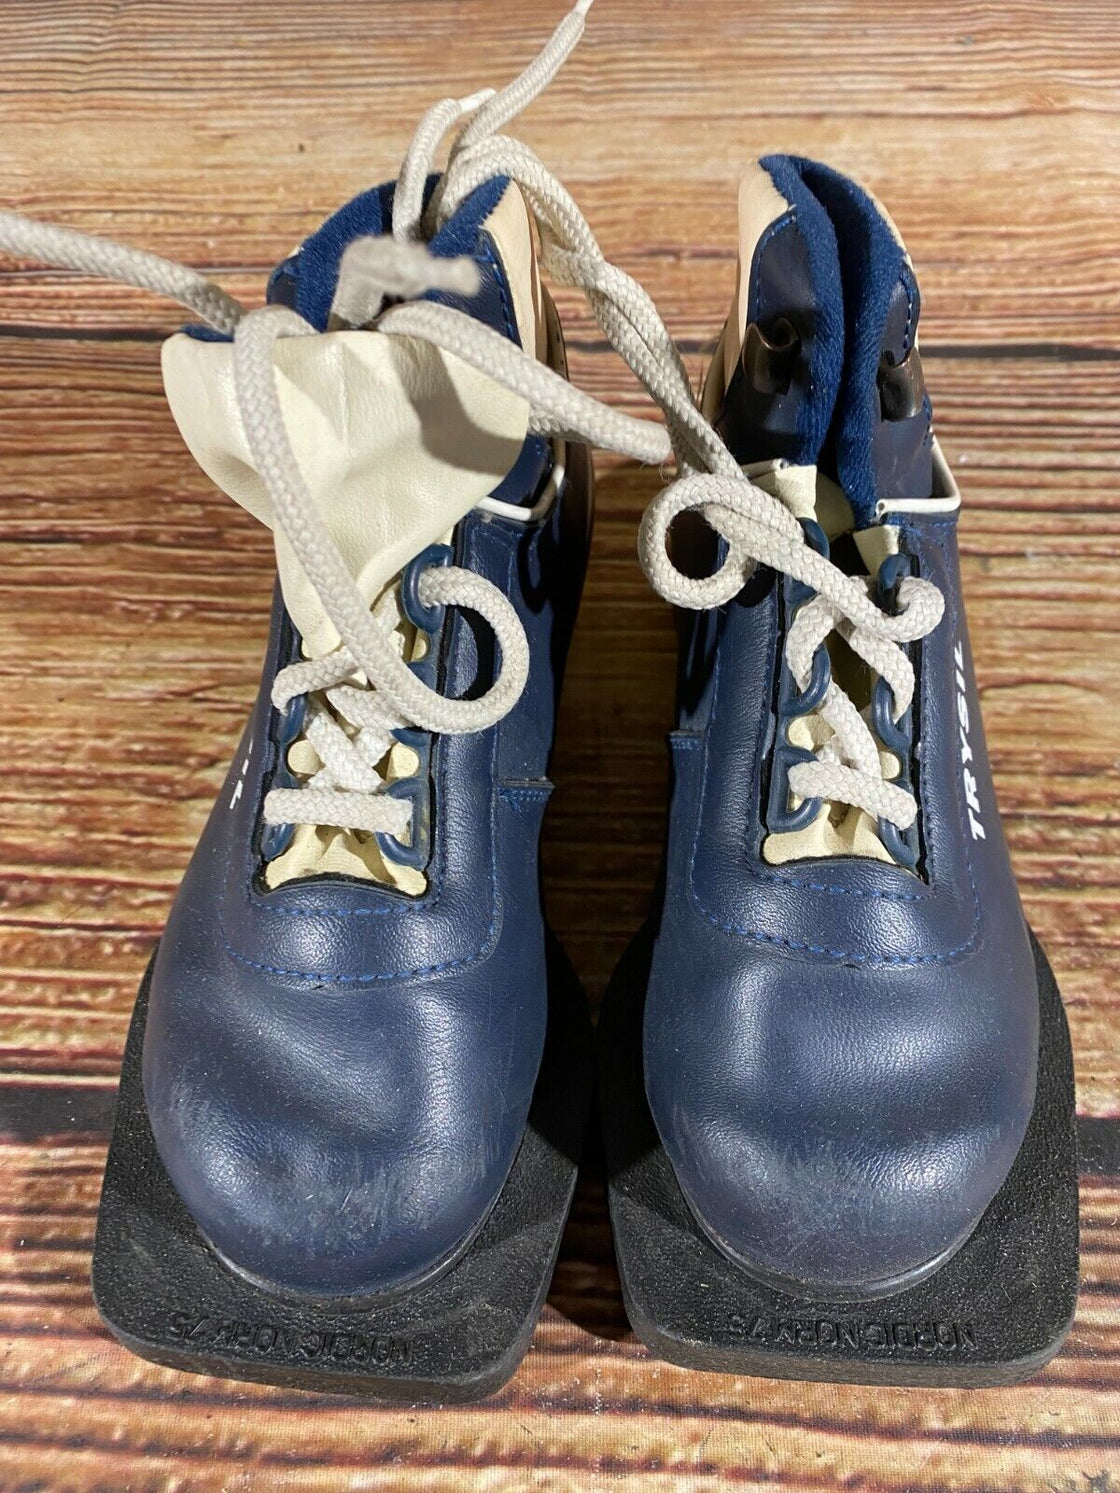 Trysil Vintage Nordic Norm Cross Country Ski Boots Size EU29 US11 NN 75mm